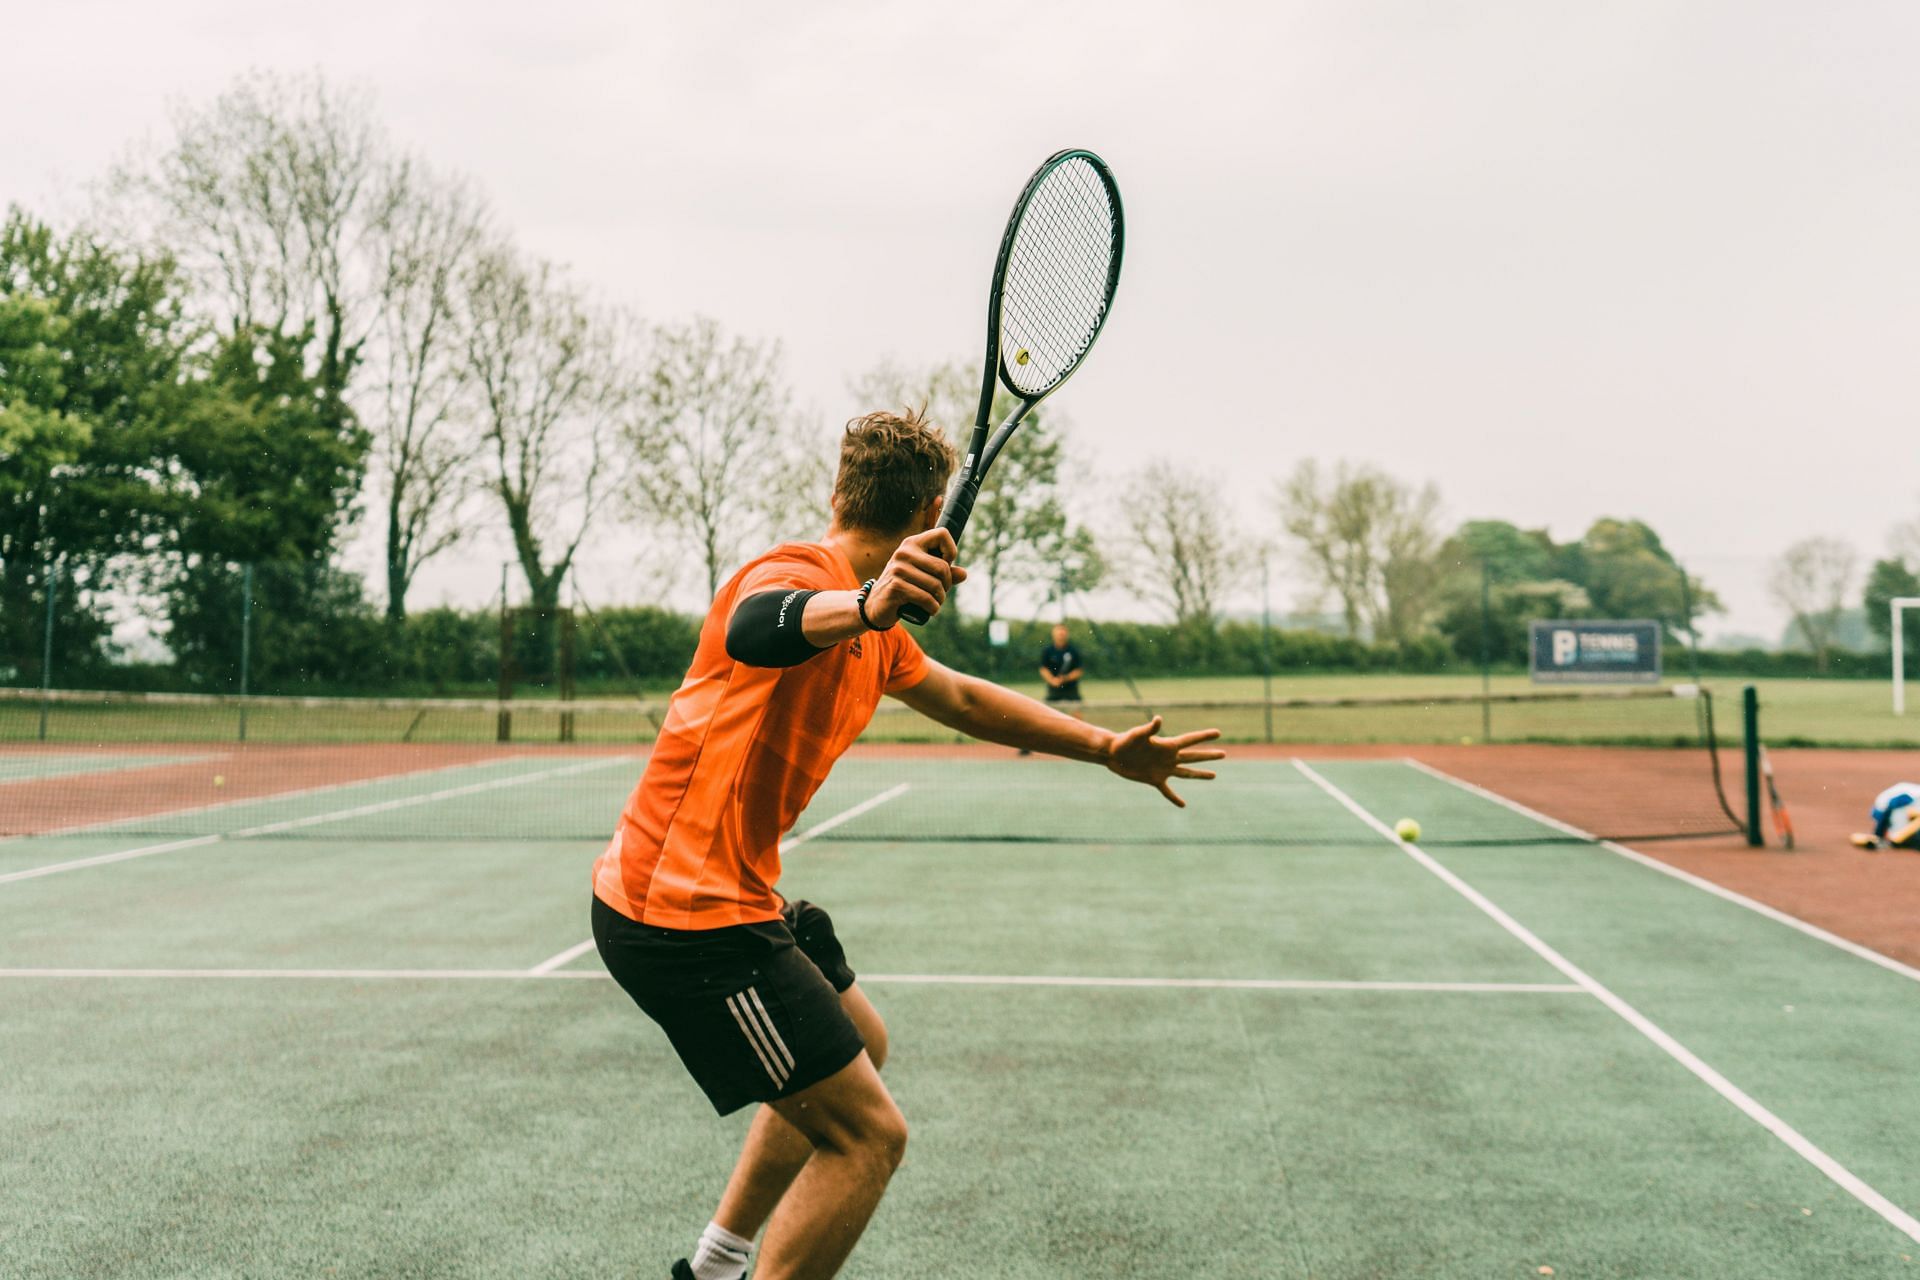 Tennis elbow (lateral epicondylitis) is an illness that can affect any and everyone, not just athletes.. (Photo by Chino Rocha on Unsplash)